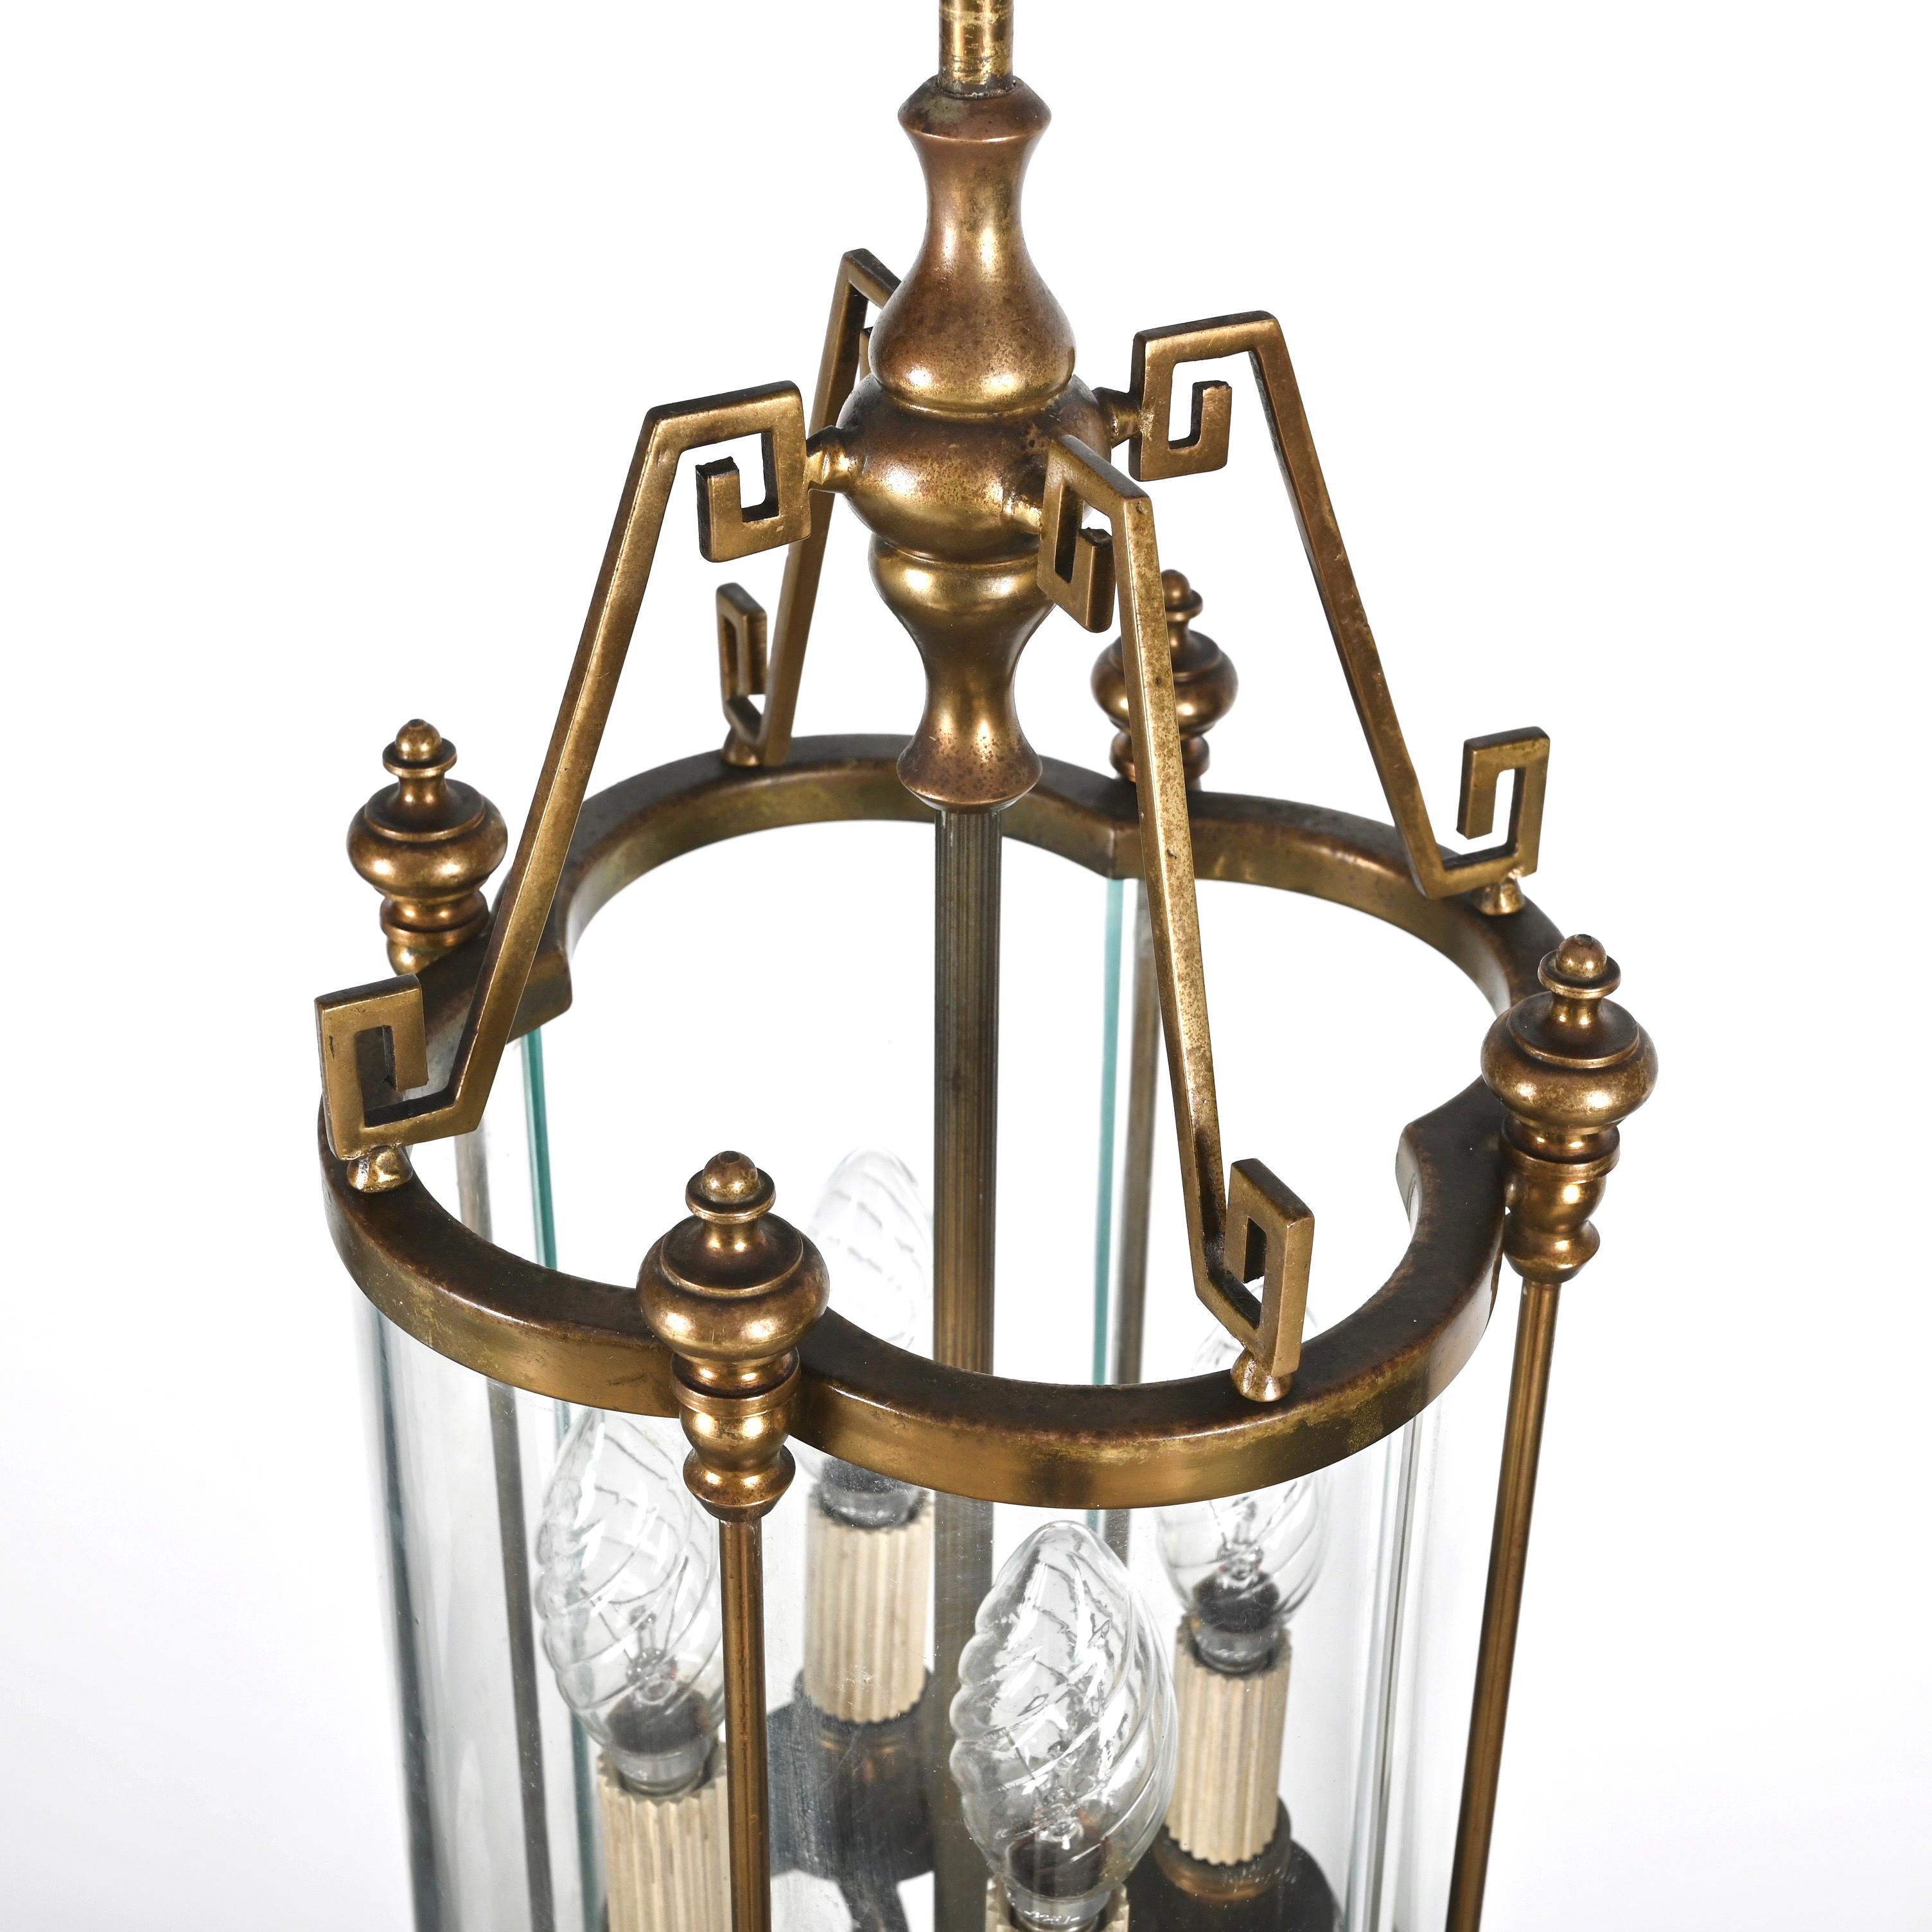 Art Deco Brass and Semicircular Glass Italian Chandelier after Adolf Loos, 1950s For Sale 13